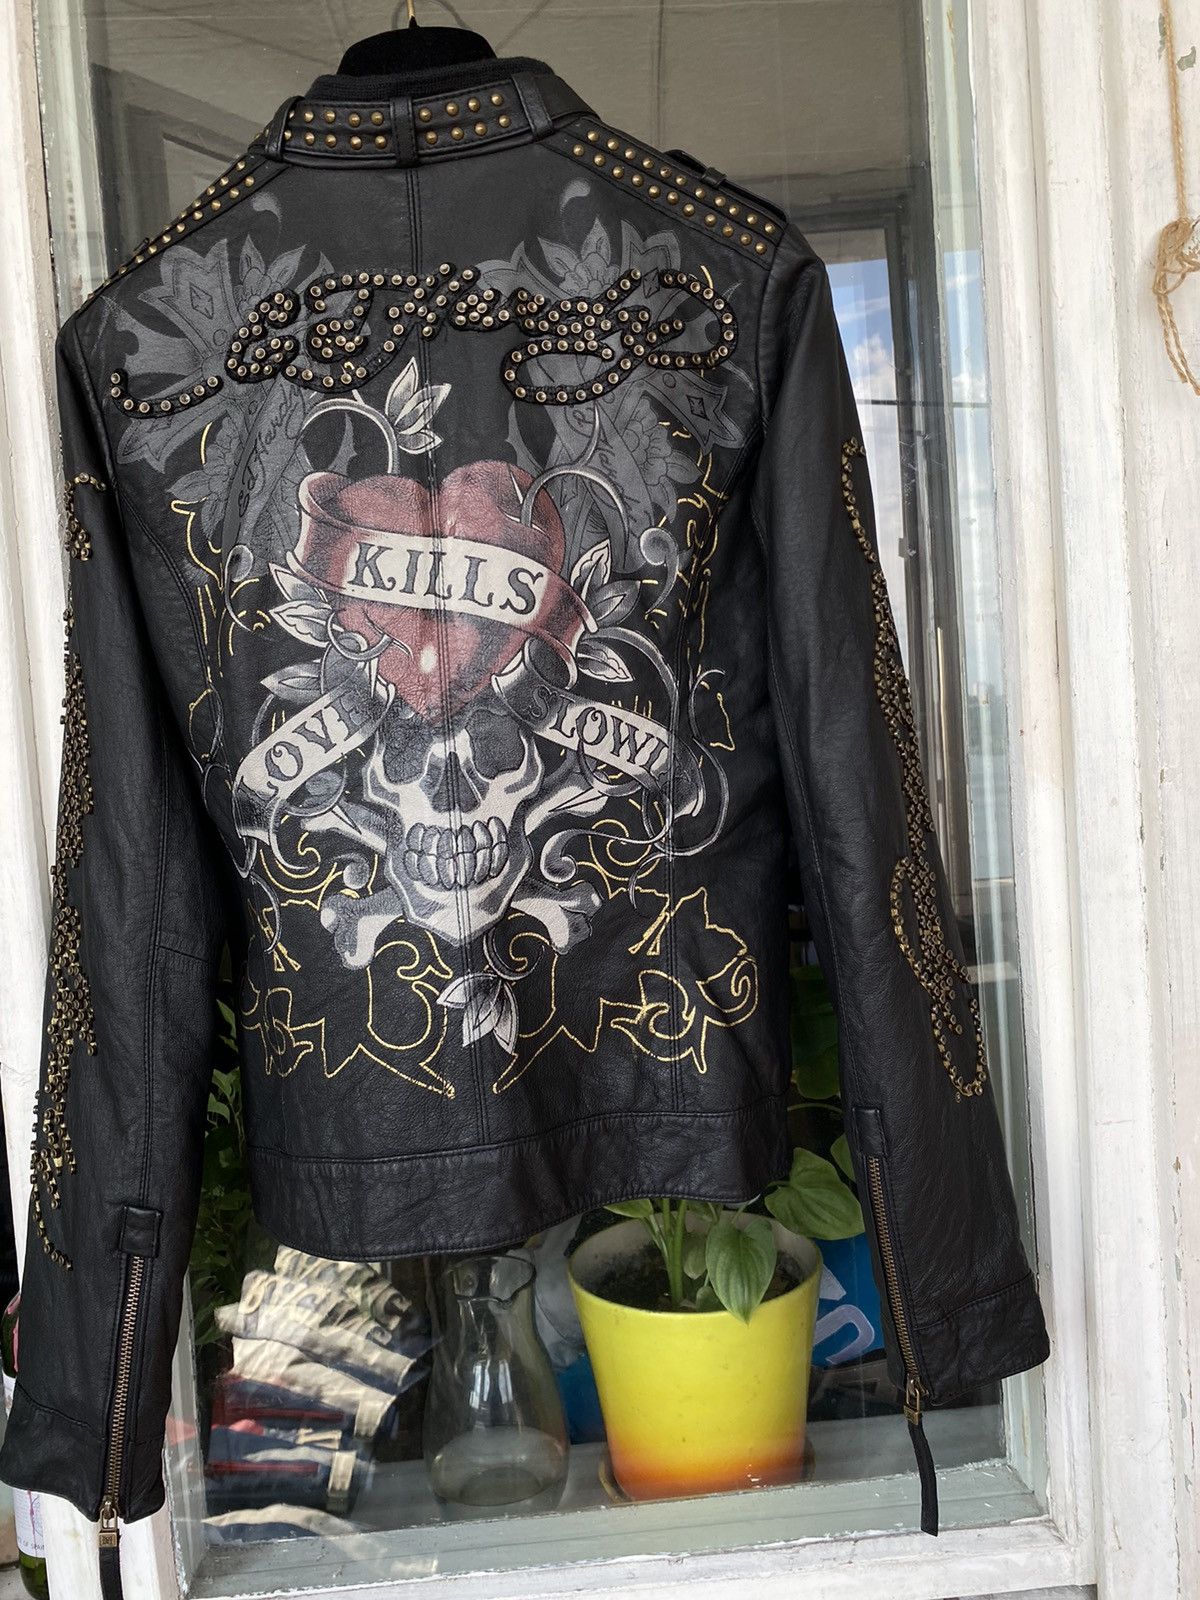 Vintage Vintage Ed hardy Jacket Leather motorcycle bomber Size US S / EU 44-46 / 1 - 1 Preview